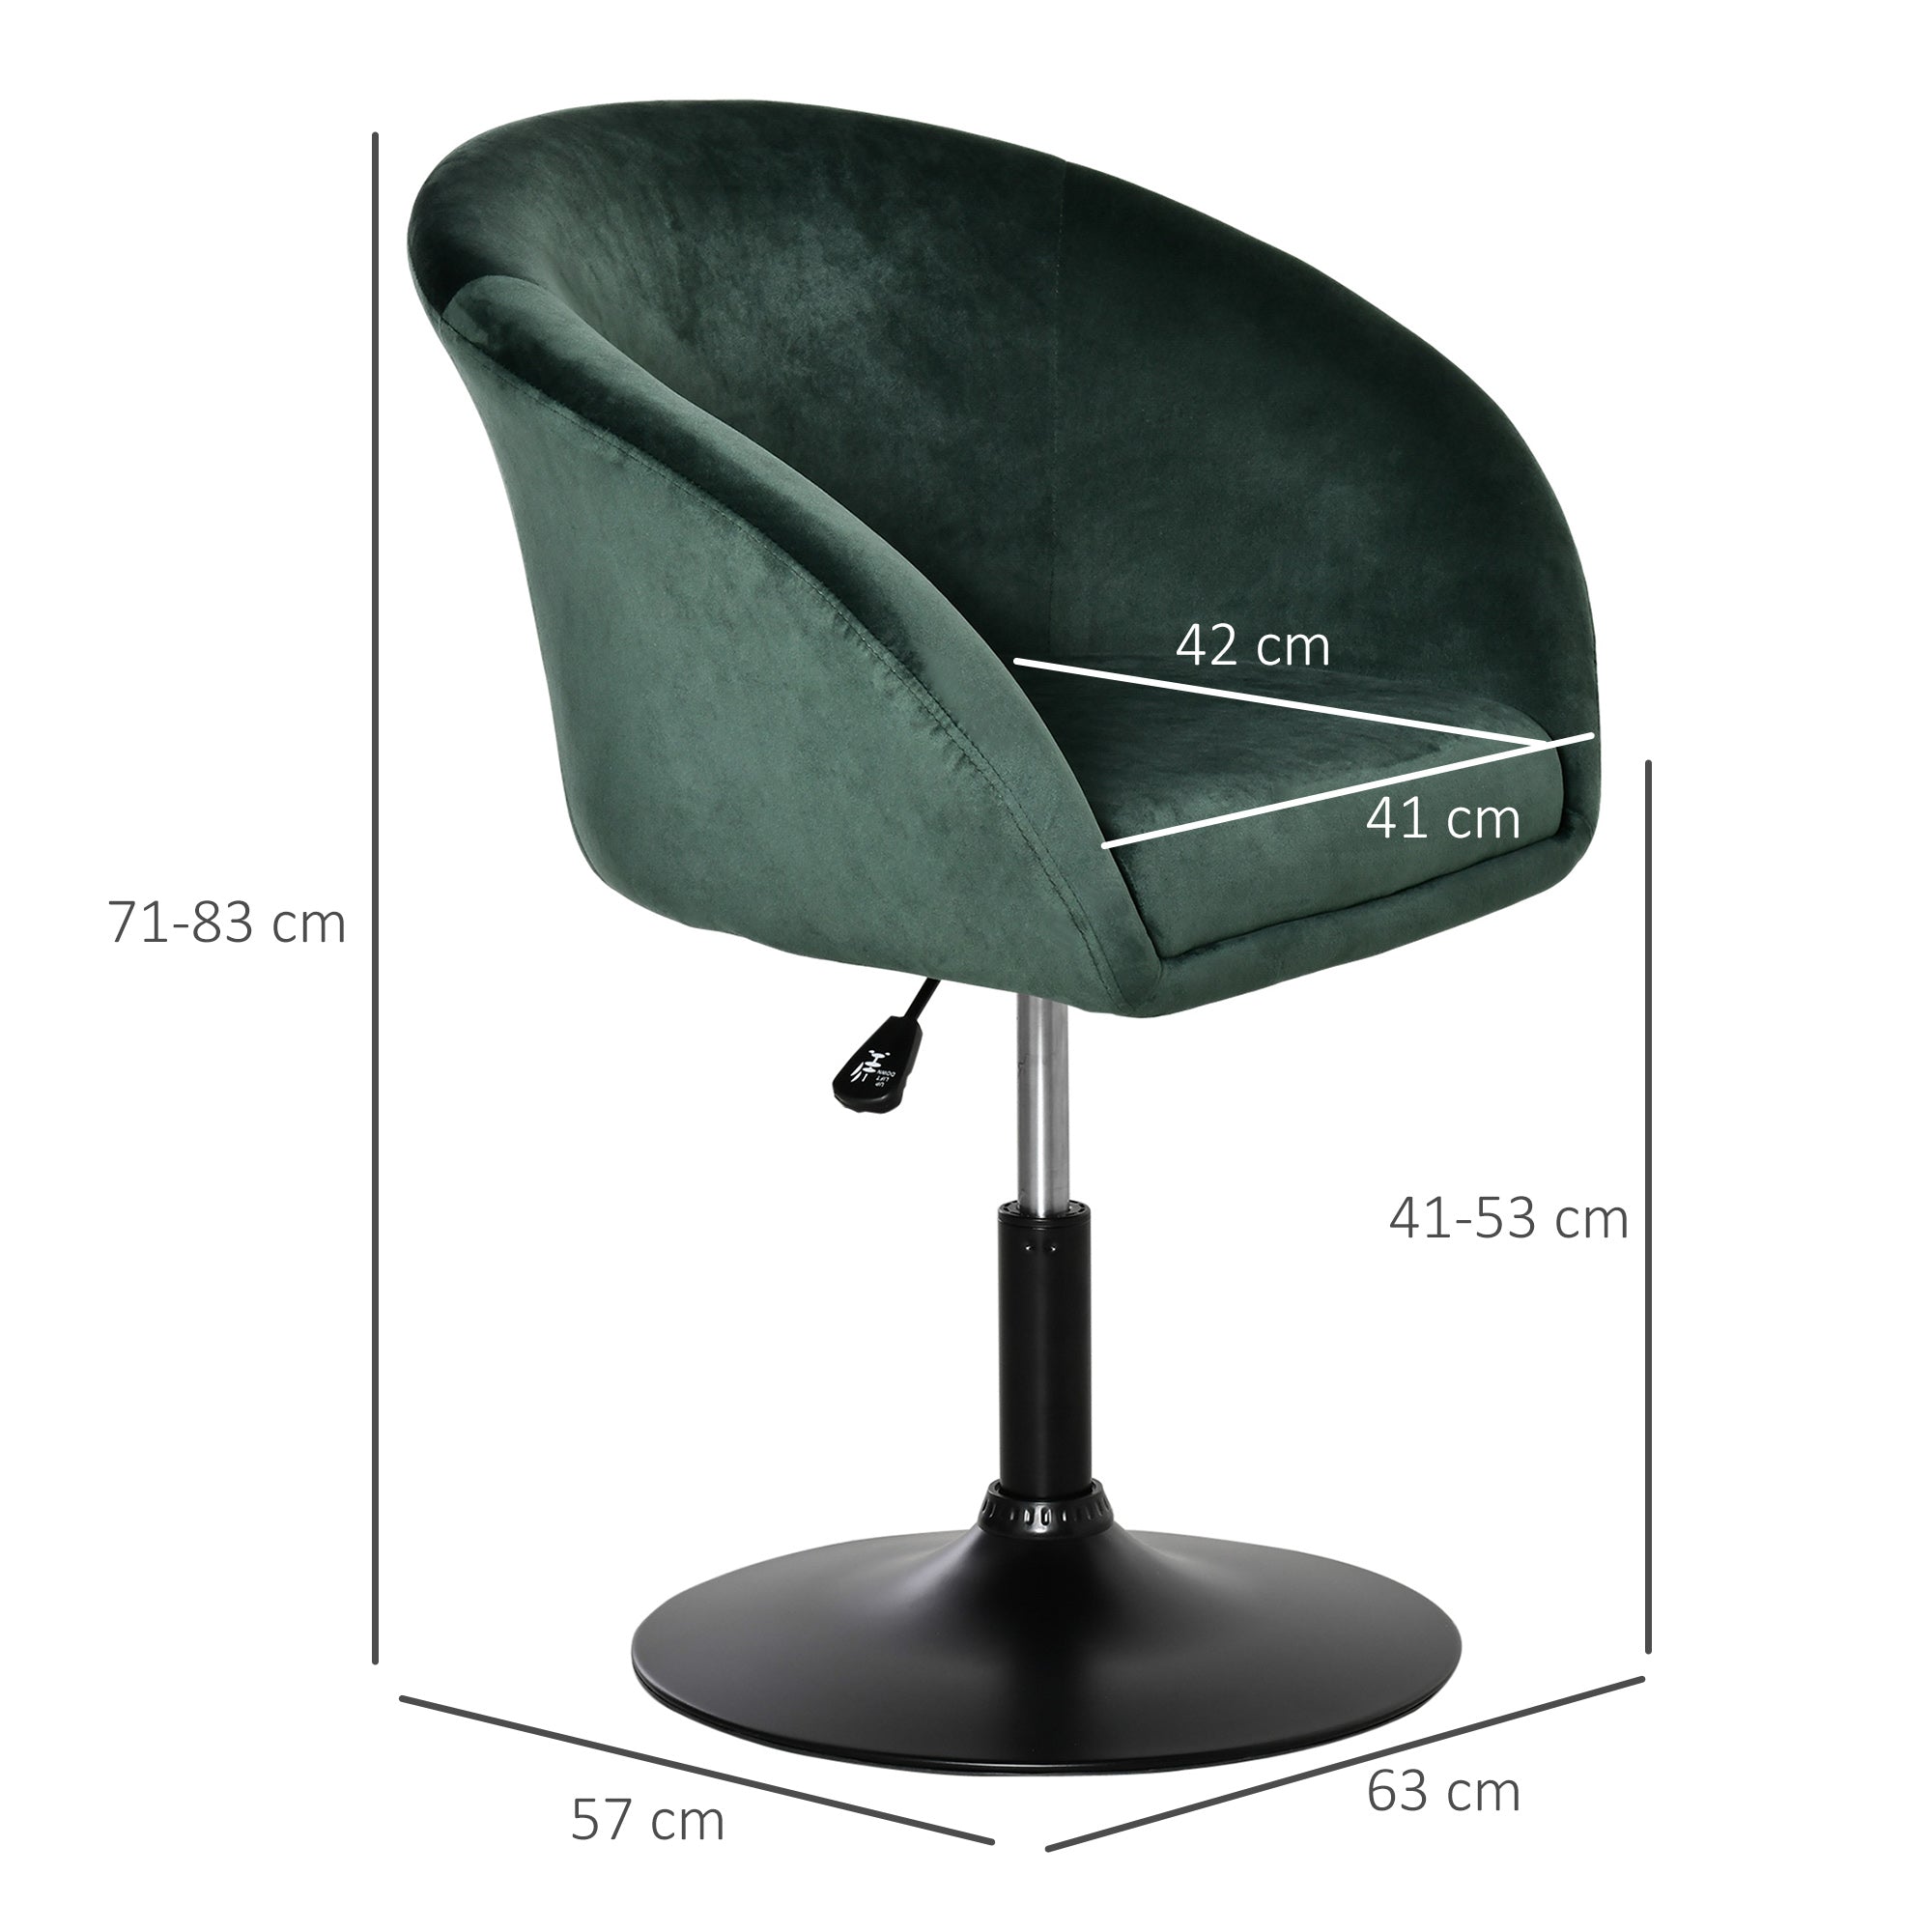 Swivel Bar Stool Fabric Dining Chair Dressing Stool with Tub Seat, Back, Adjustable Height, Green  AOSOM   